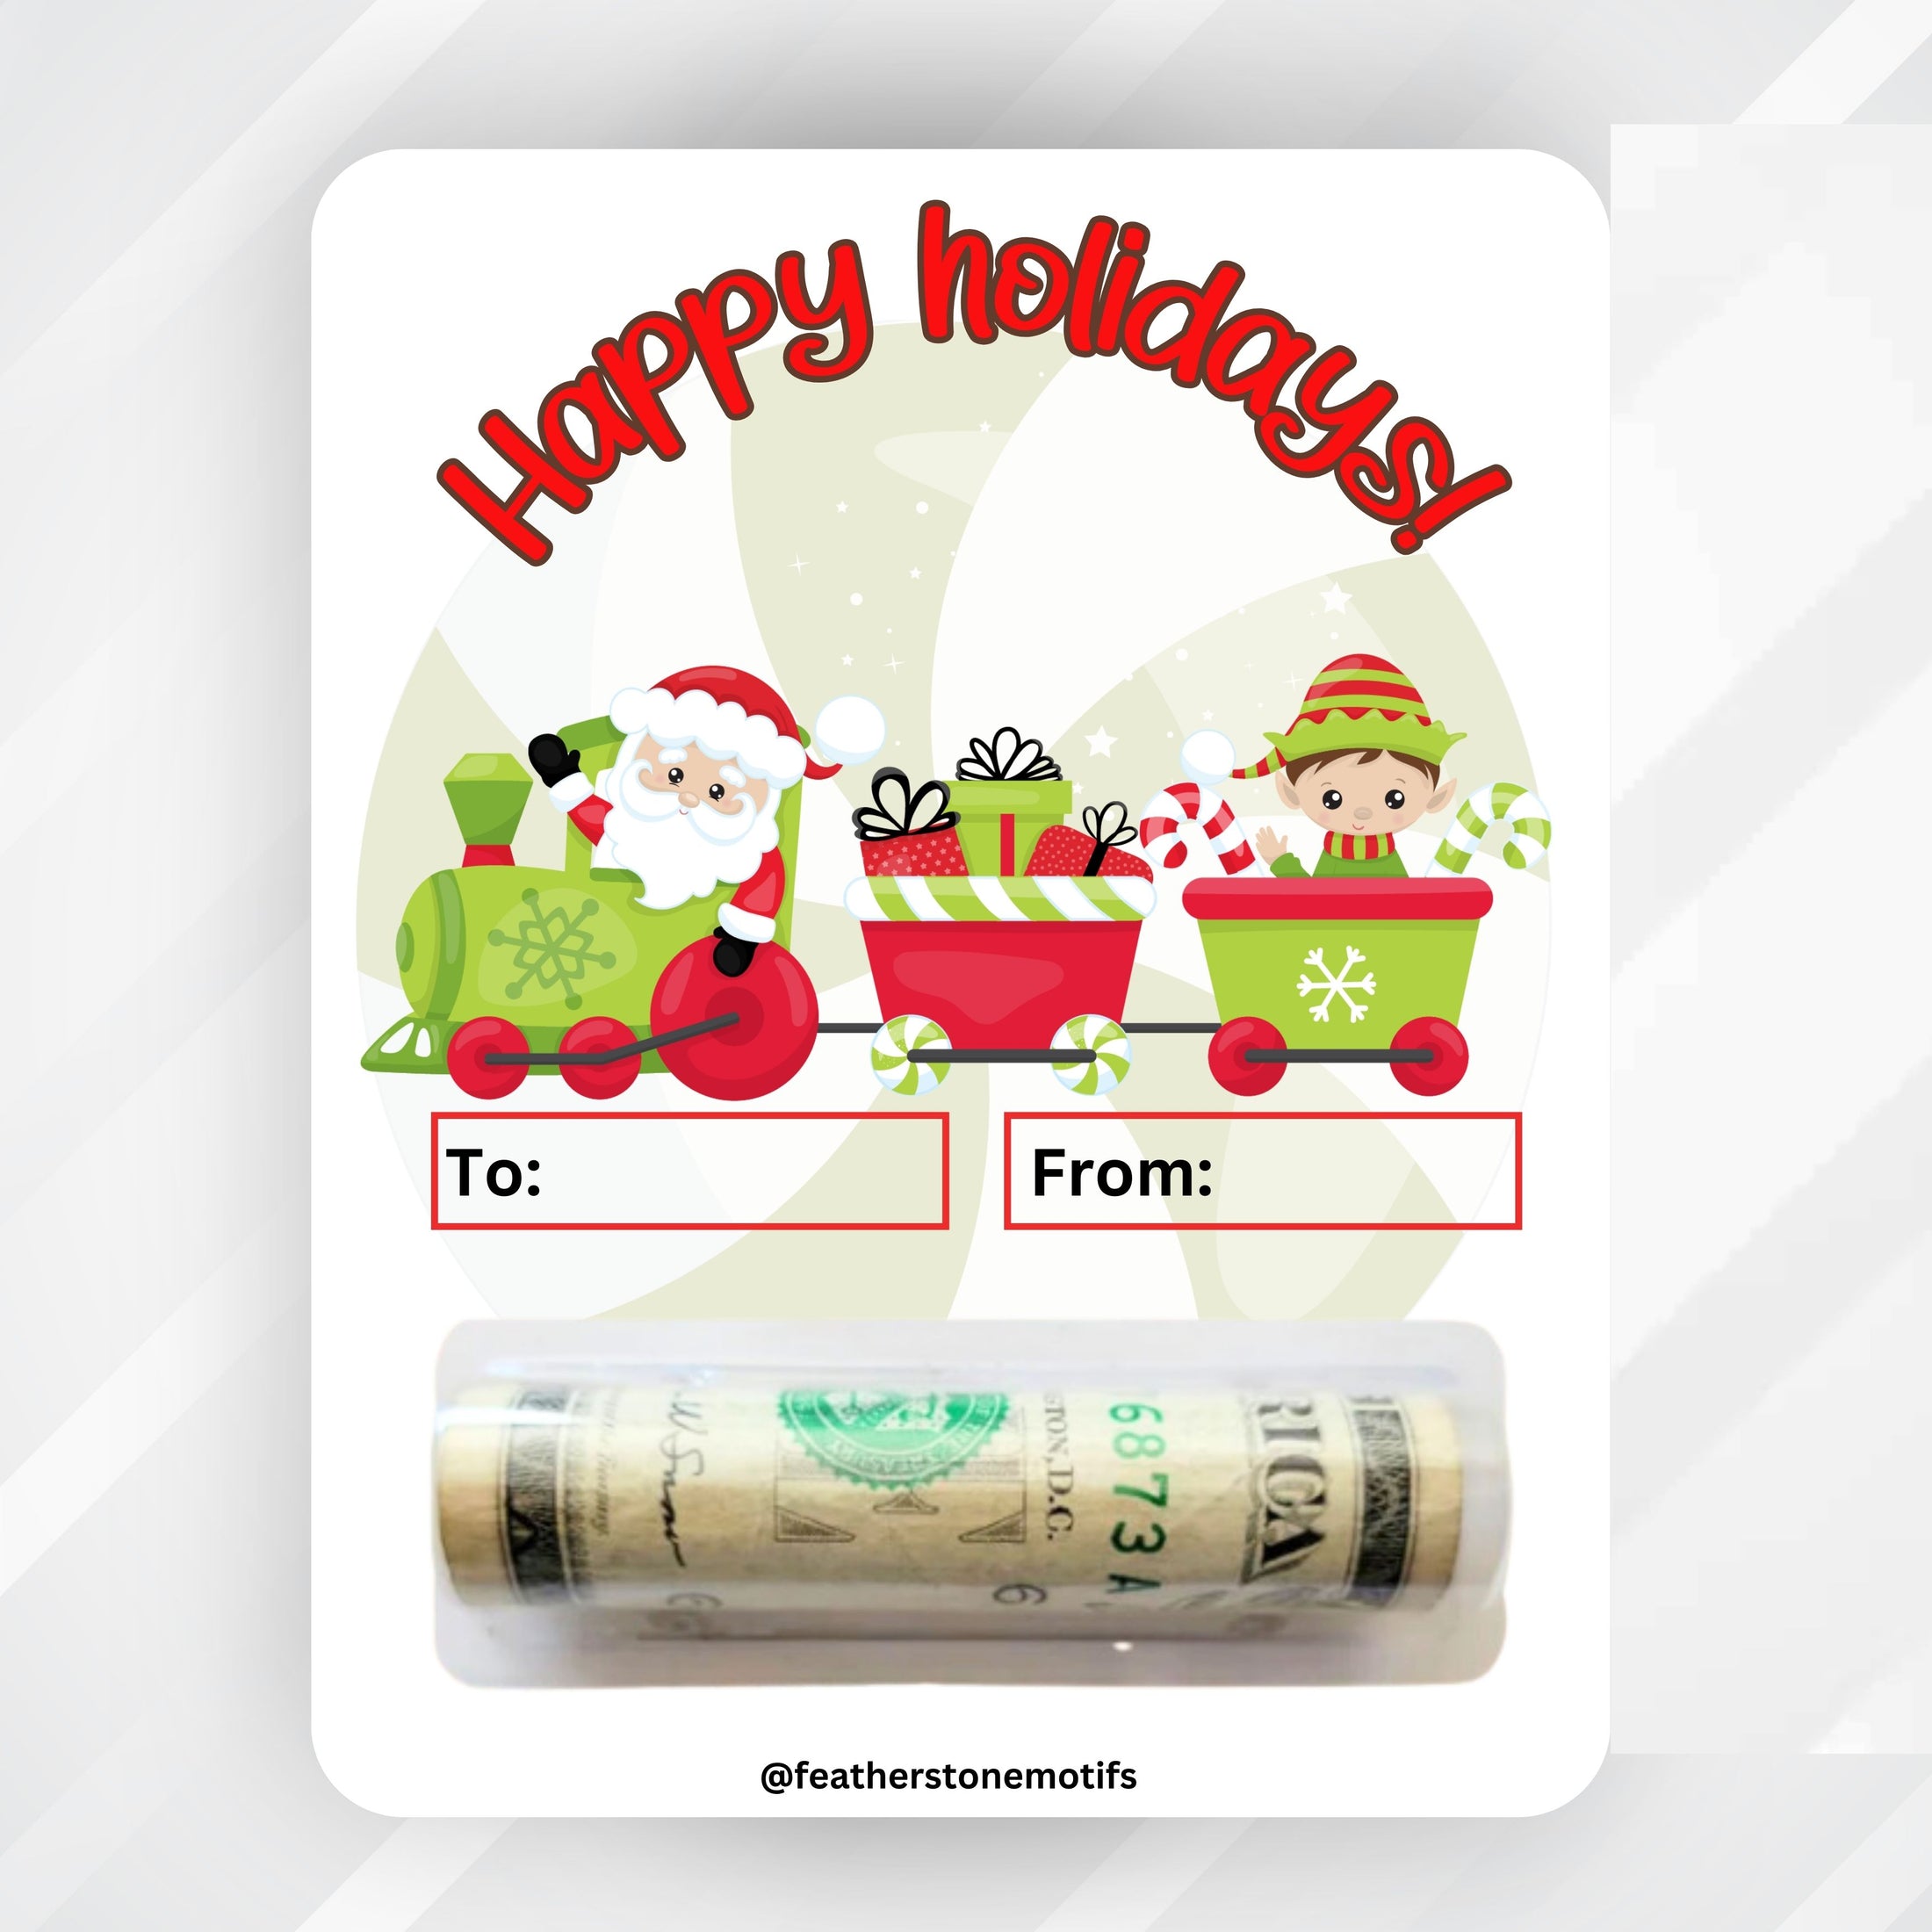 This image shows the money tube attached to the Santa Train Money Card.